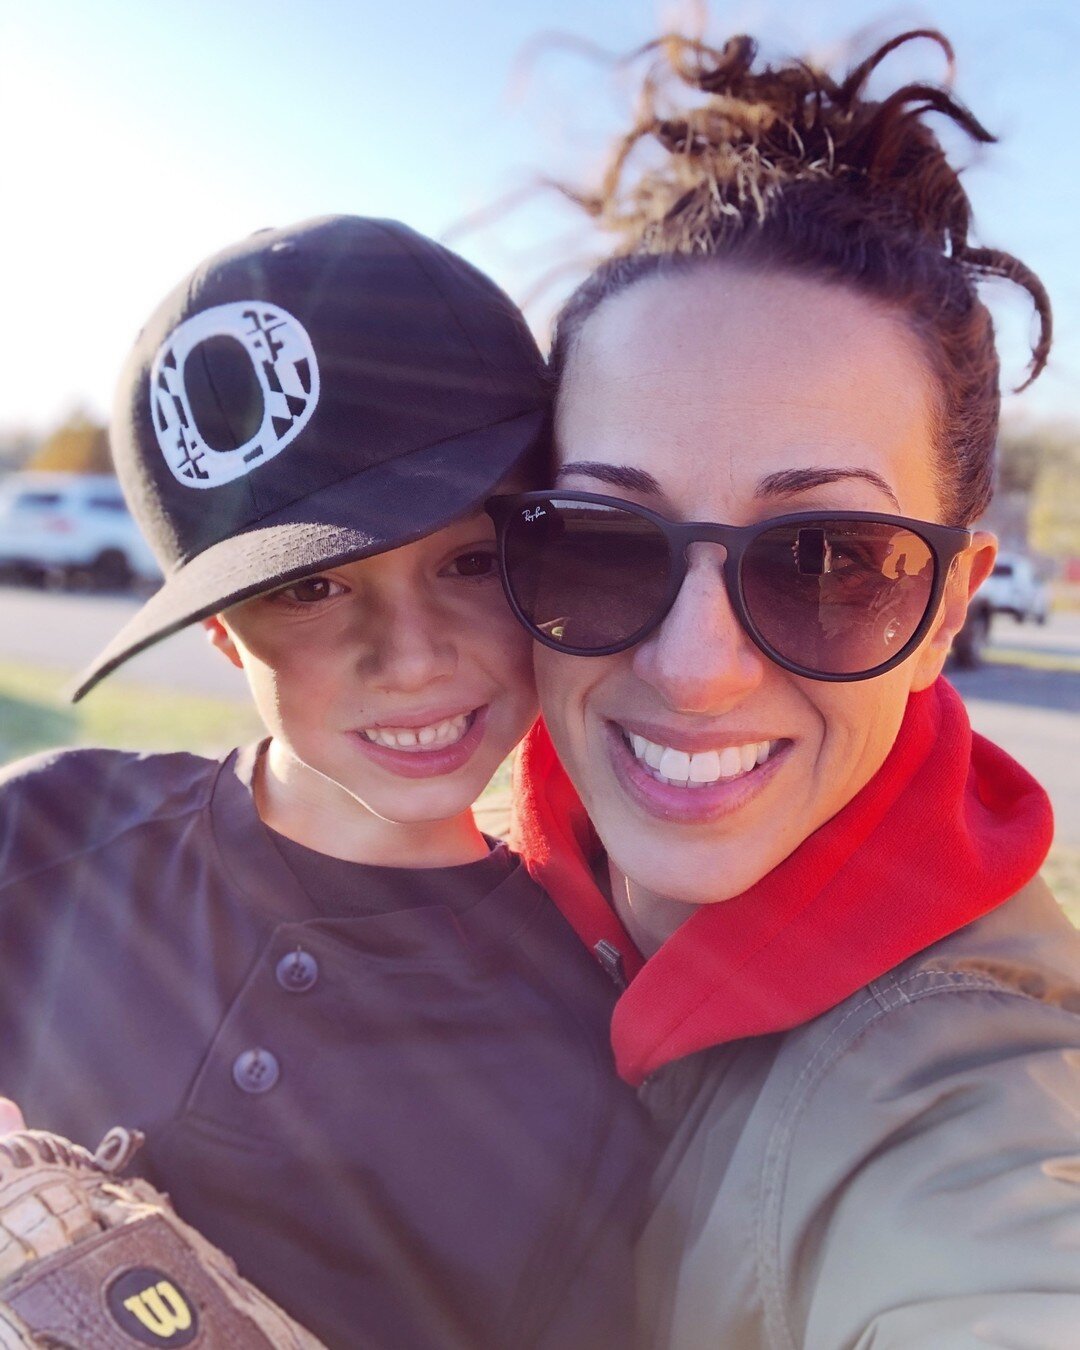 I was hit with a few curveballs this week and my whole schedule was thrown off. ⁣⁣
 ⁣⁣
But I guess I shouldn&rsquo;t complain... I mean, it's not like I 𝘭𝘪𝘵𝘦𝘳𝘢𝘭𝘭𝘺 got hit by a curveball, unlike my son. ⁣⁣
 ⁣⁣
This past weekend David took a b